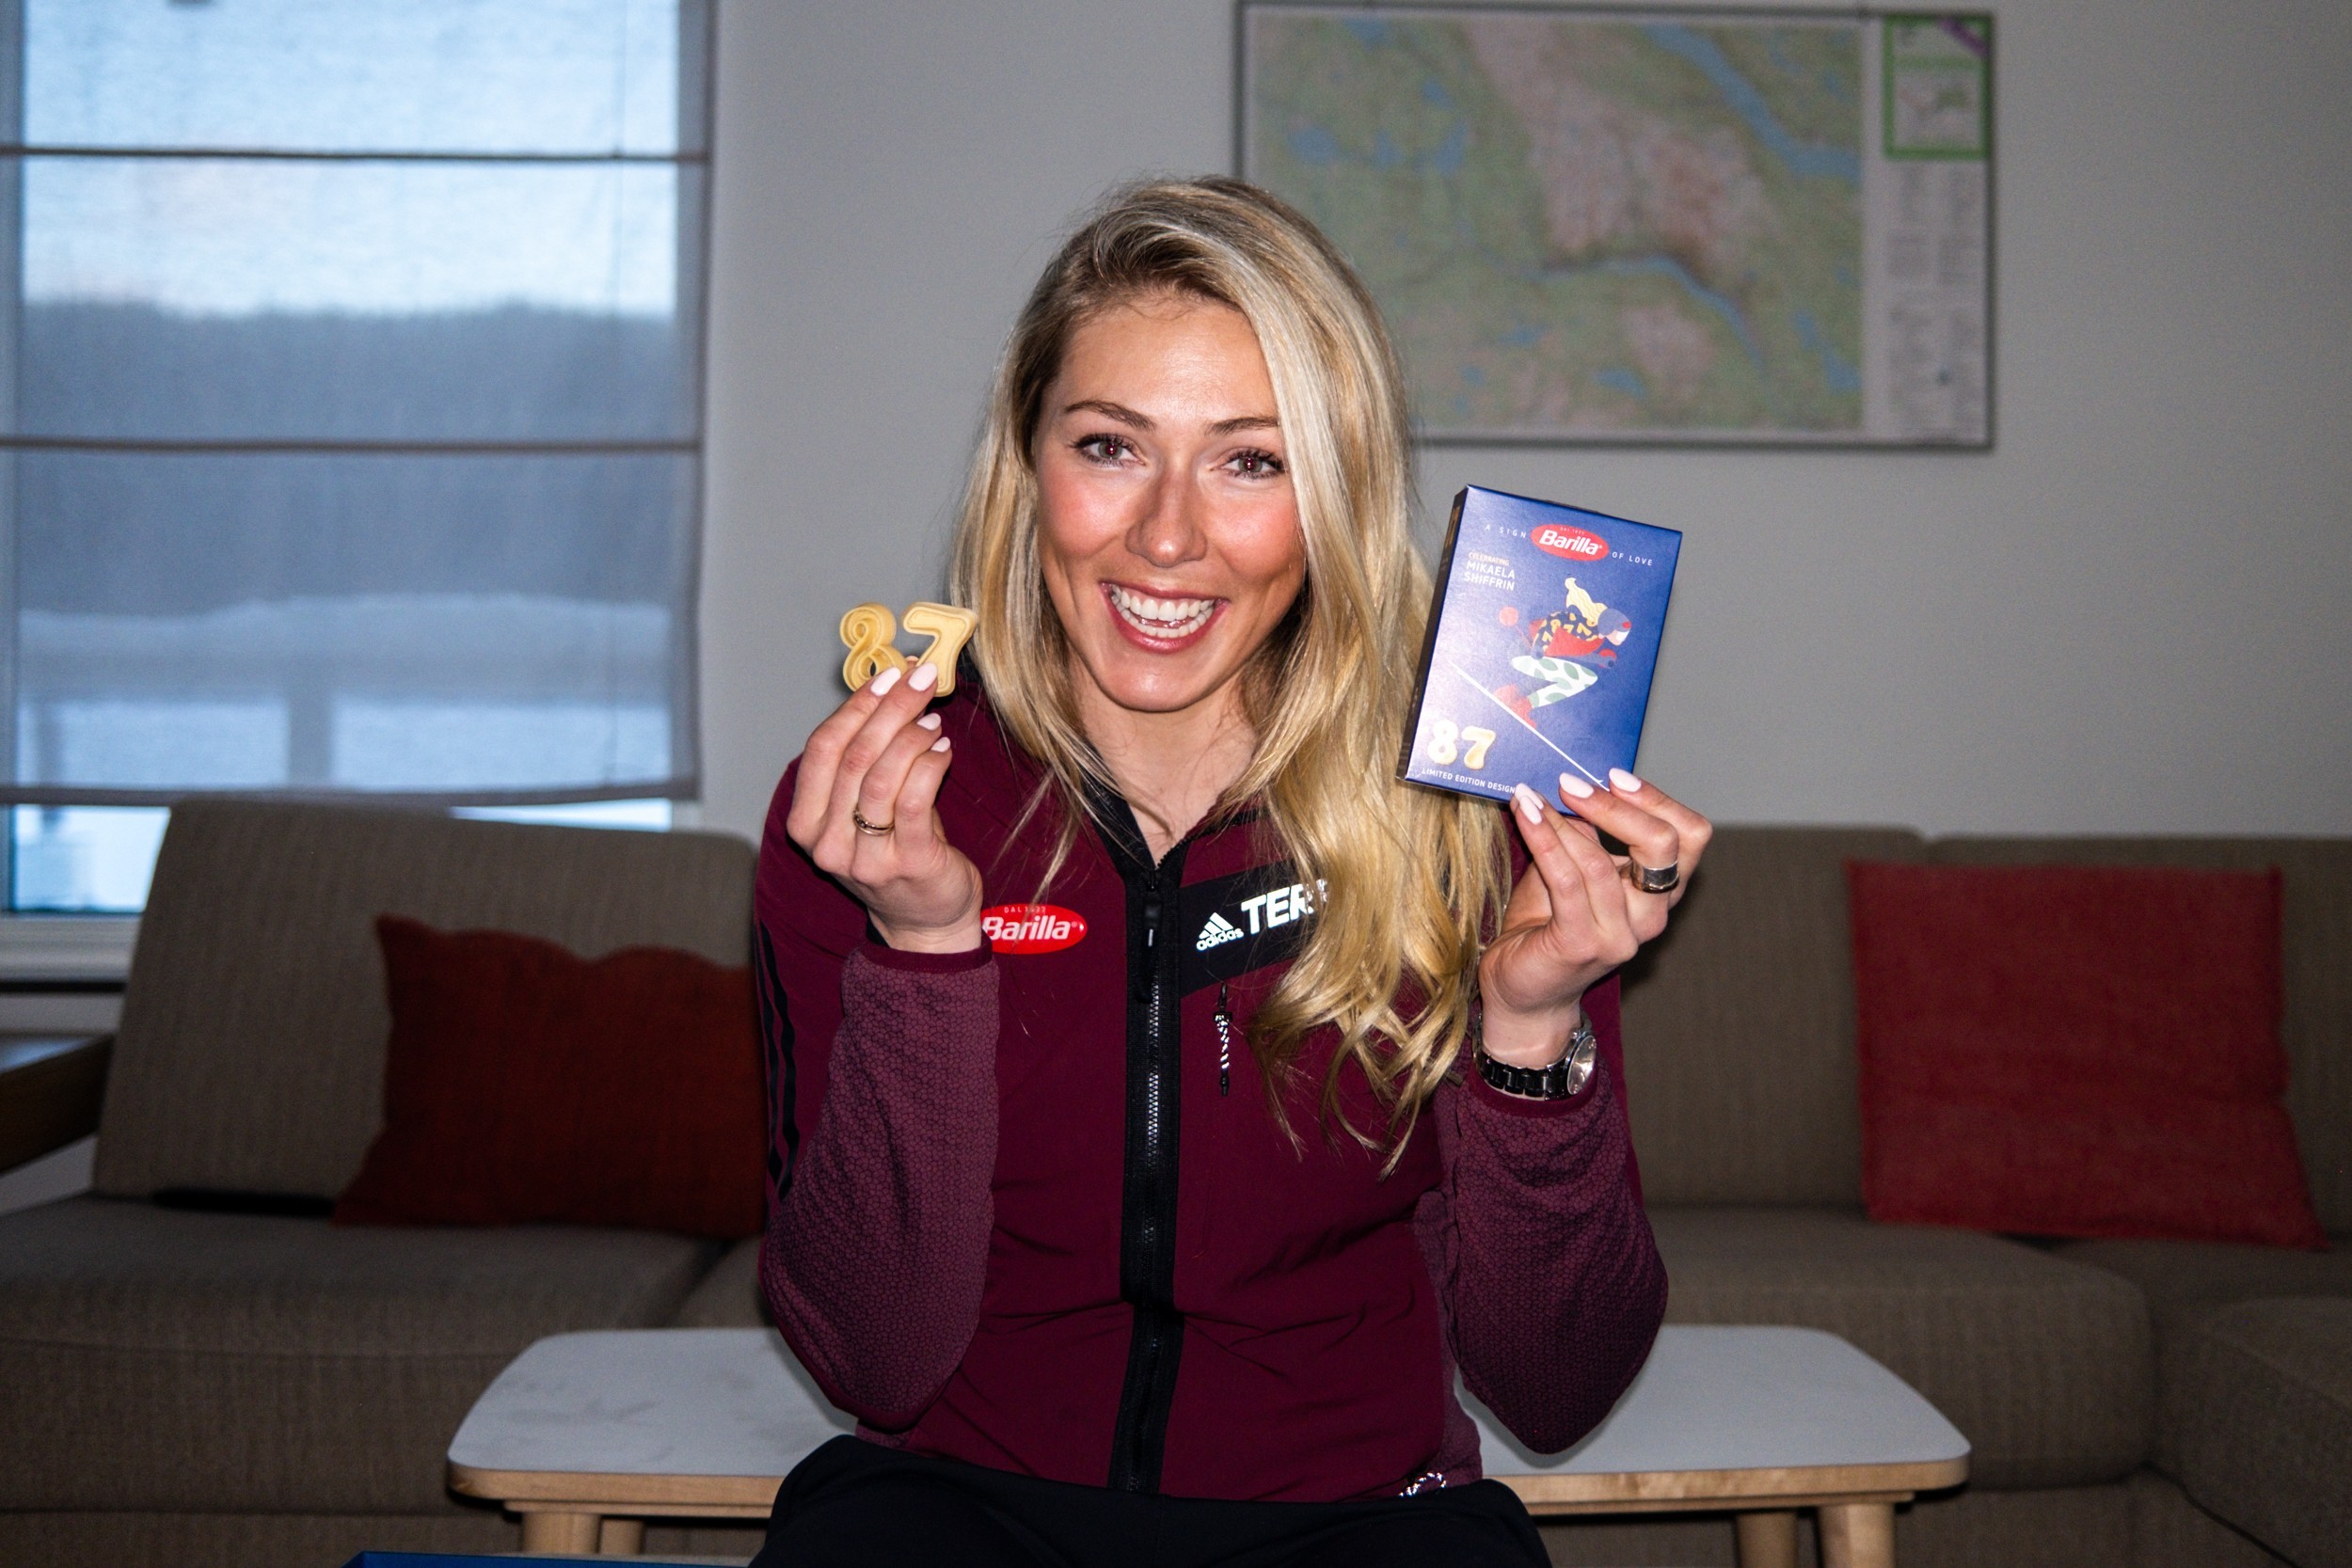 Barilla & Mikaela Shiffrin: Greatness starts with a great recipe - Pack No. 23   